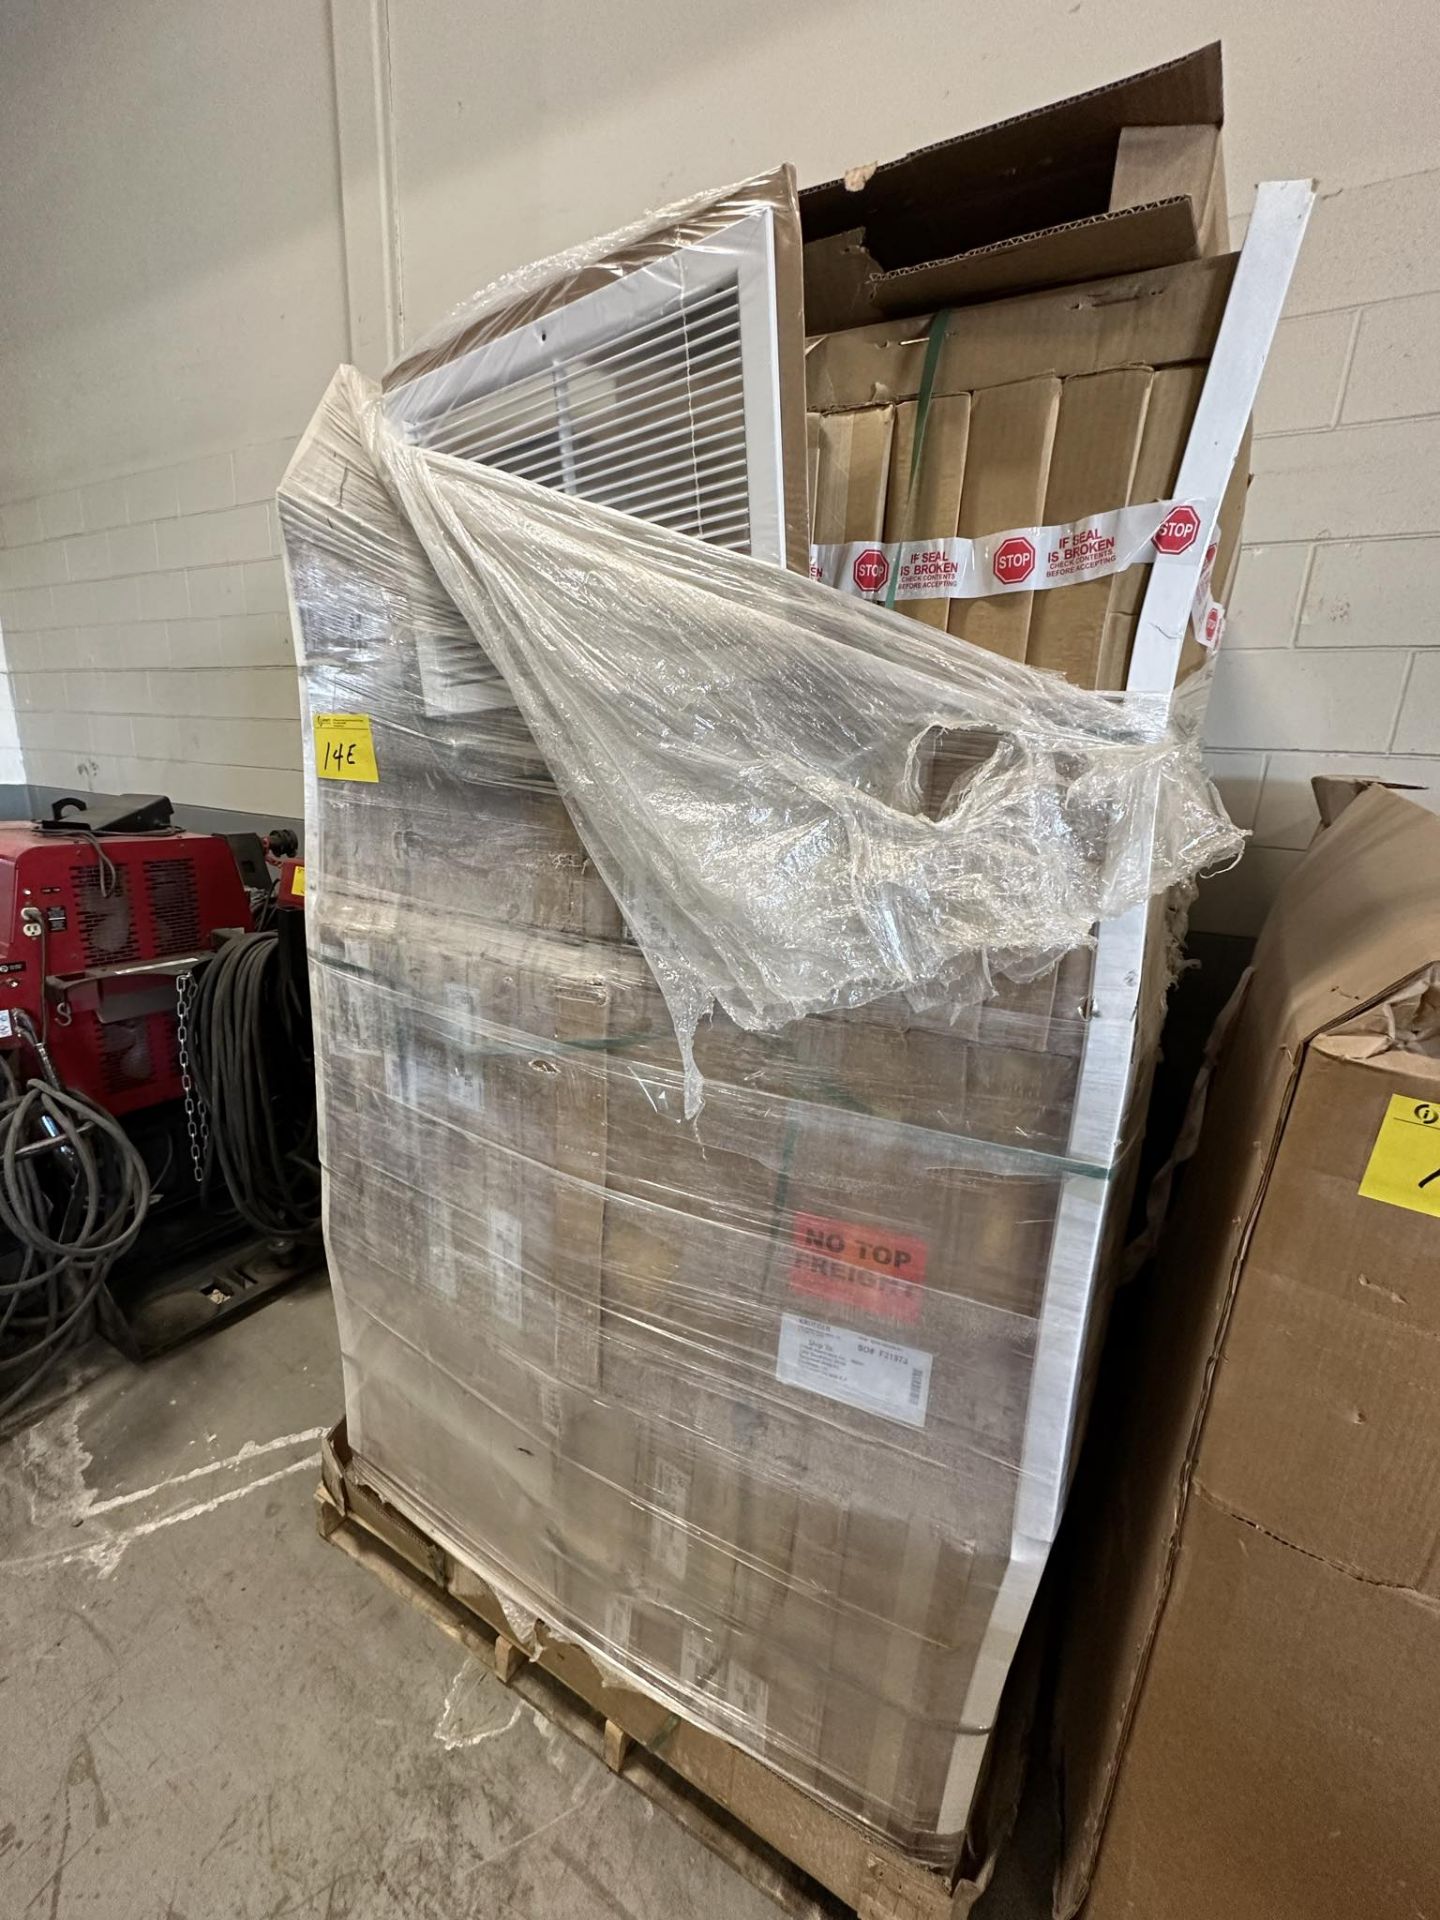 PALLET OF VENT COVERS